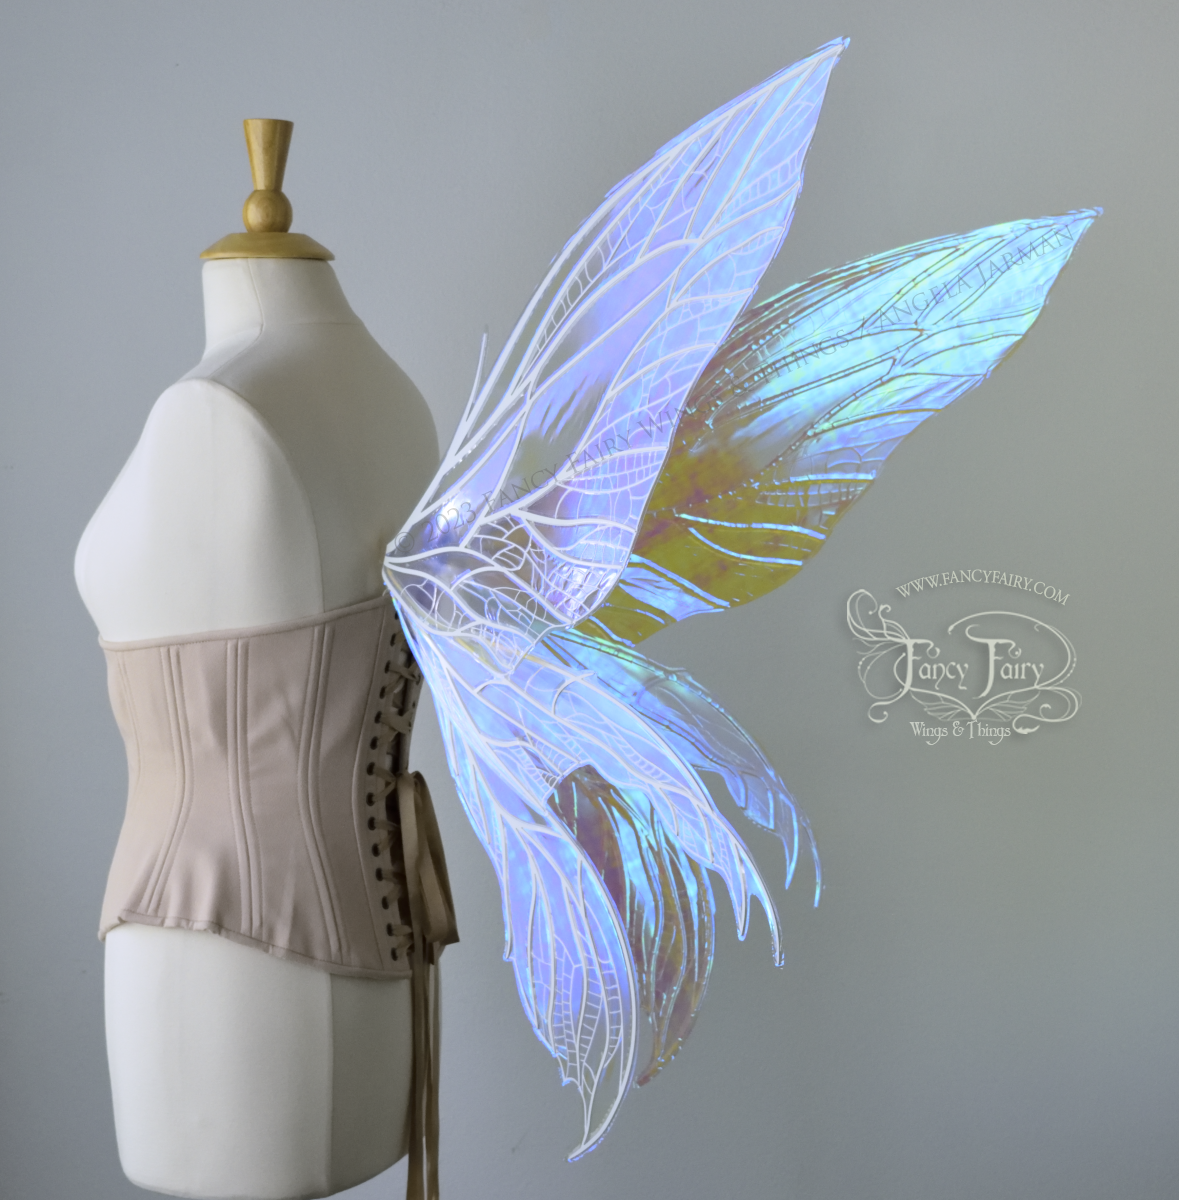 Side back view of an ivory dress form wearing an underbust corset and large blue/teal/violet iridescent fairy wings. Upper panels are elongated with pointed tips, 2 lower panels curve downward, detailed white veins, standing against a white / grey background